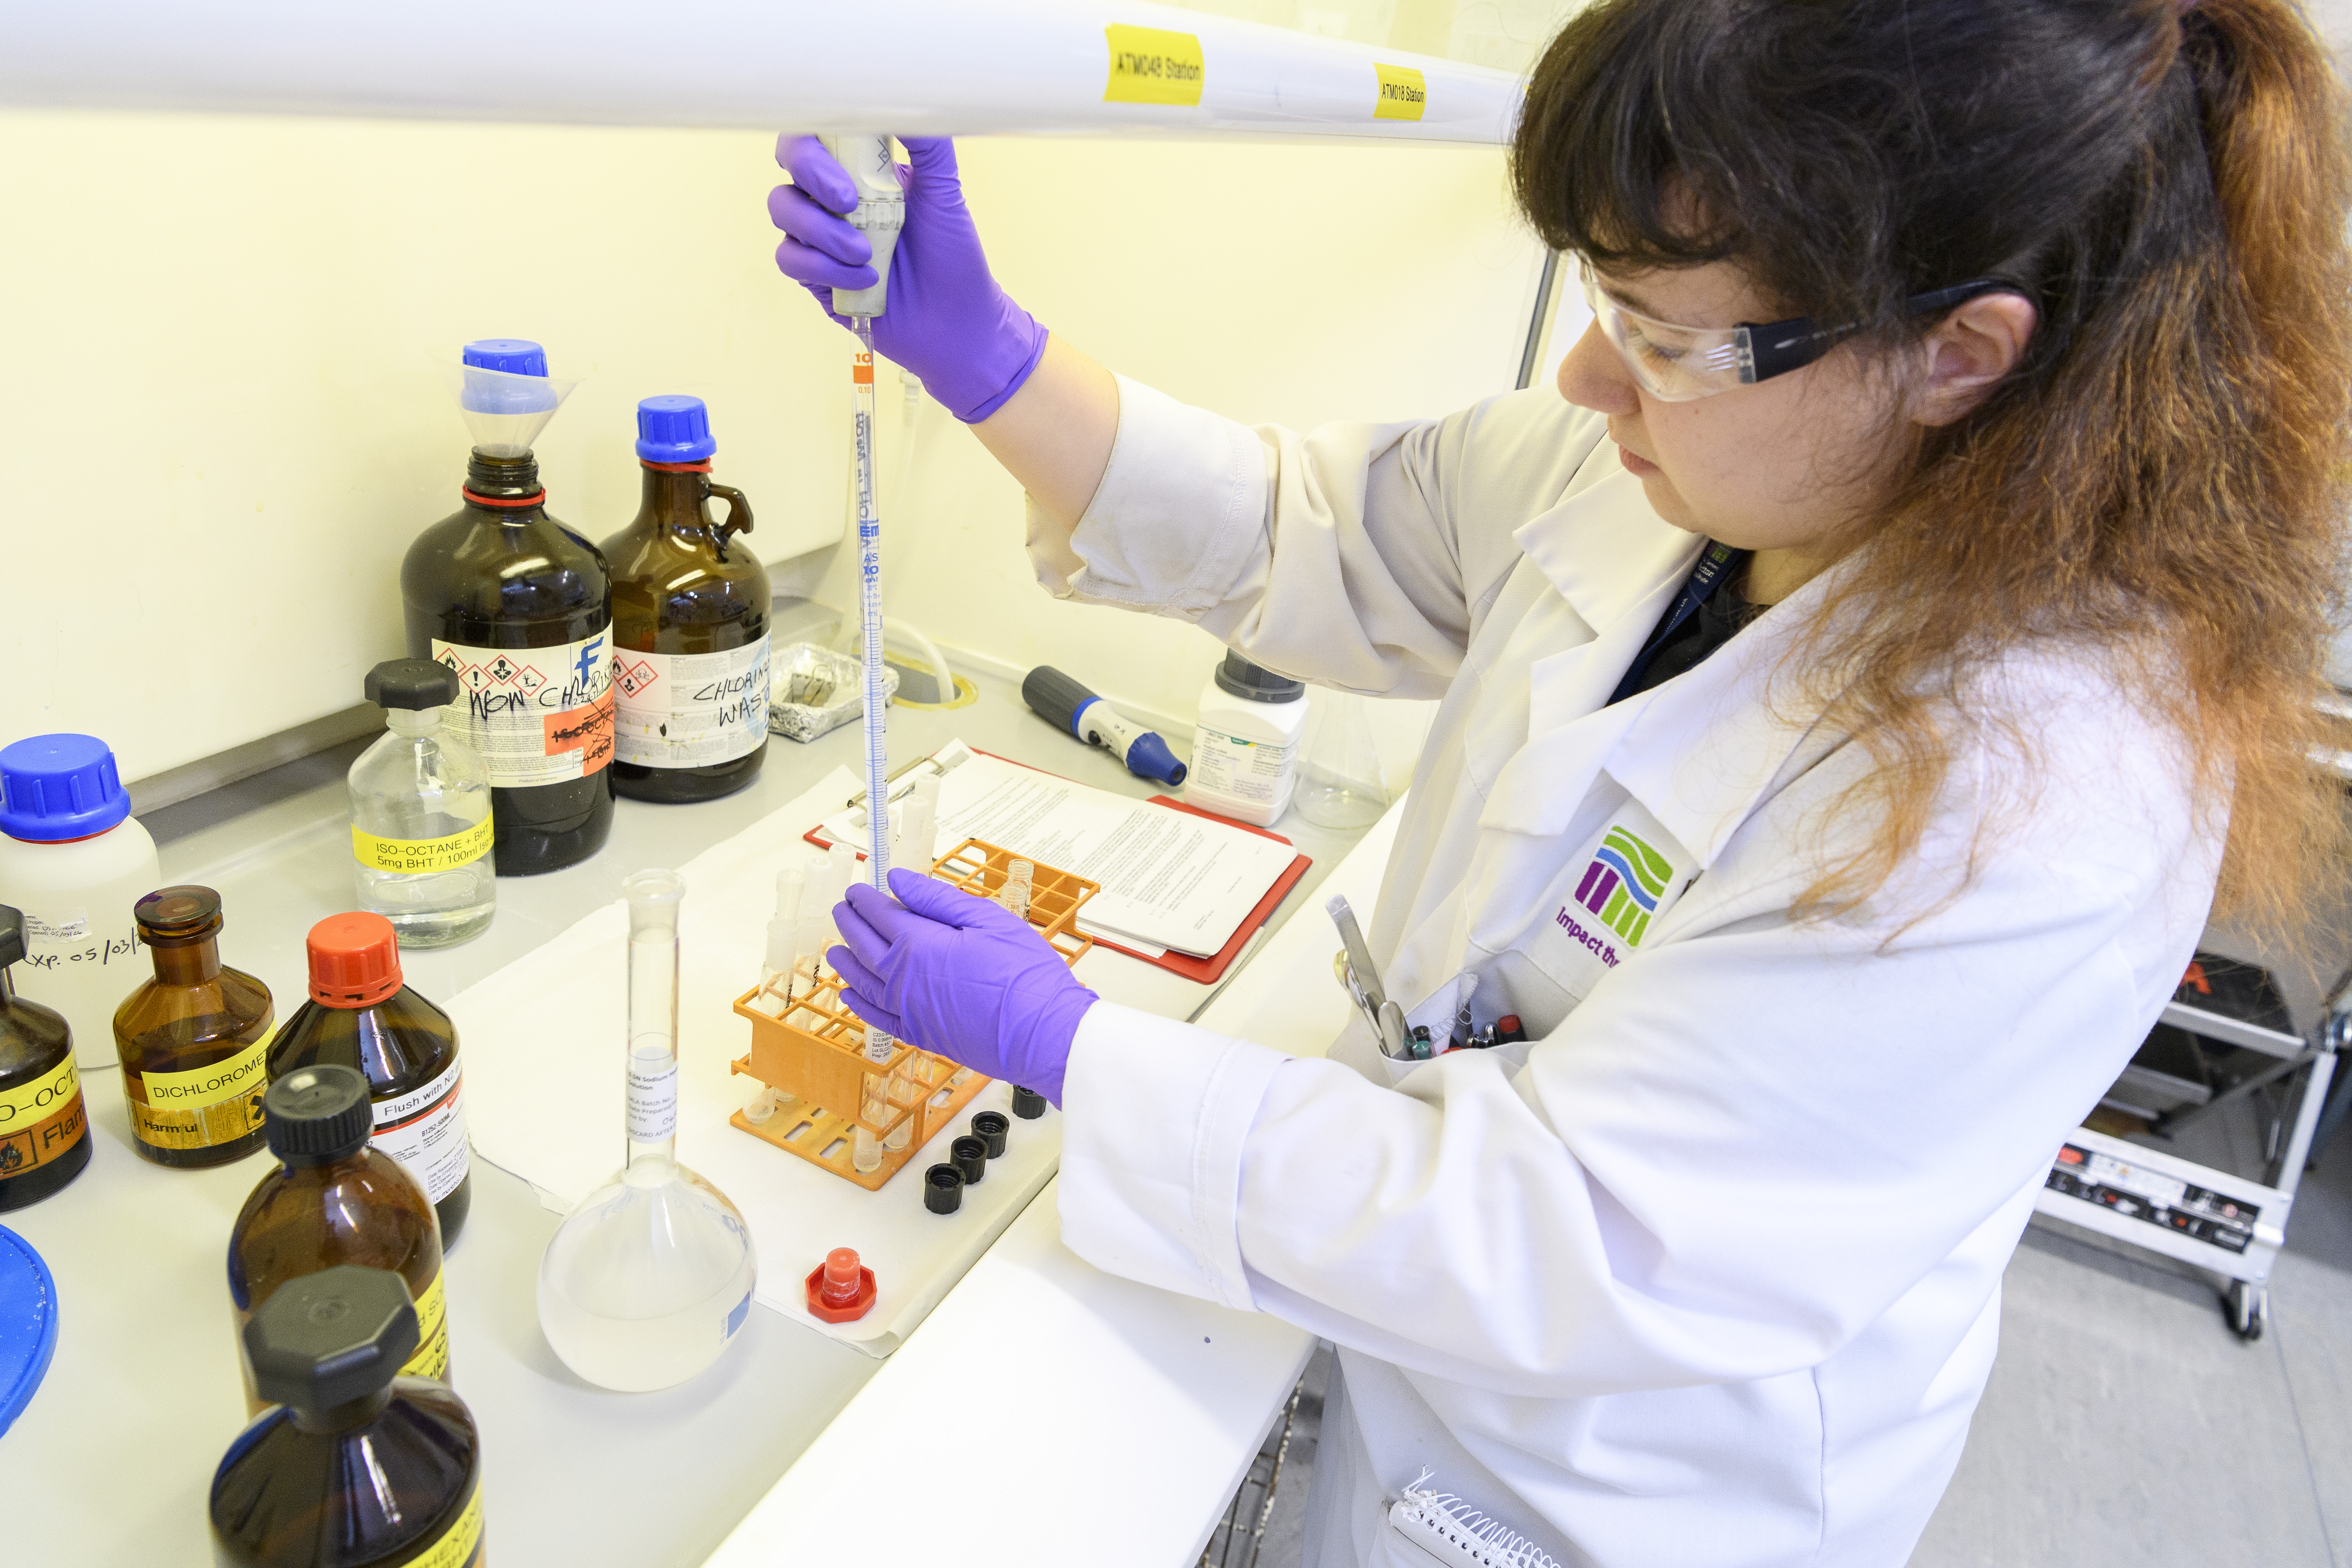 Mylnefield Lipid Analysis provide a full range of services relating to cannabinoid testing